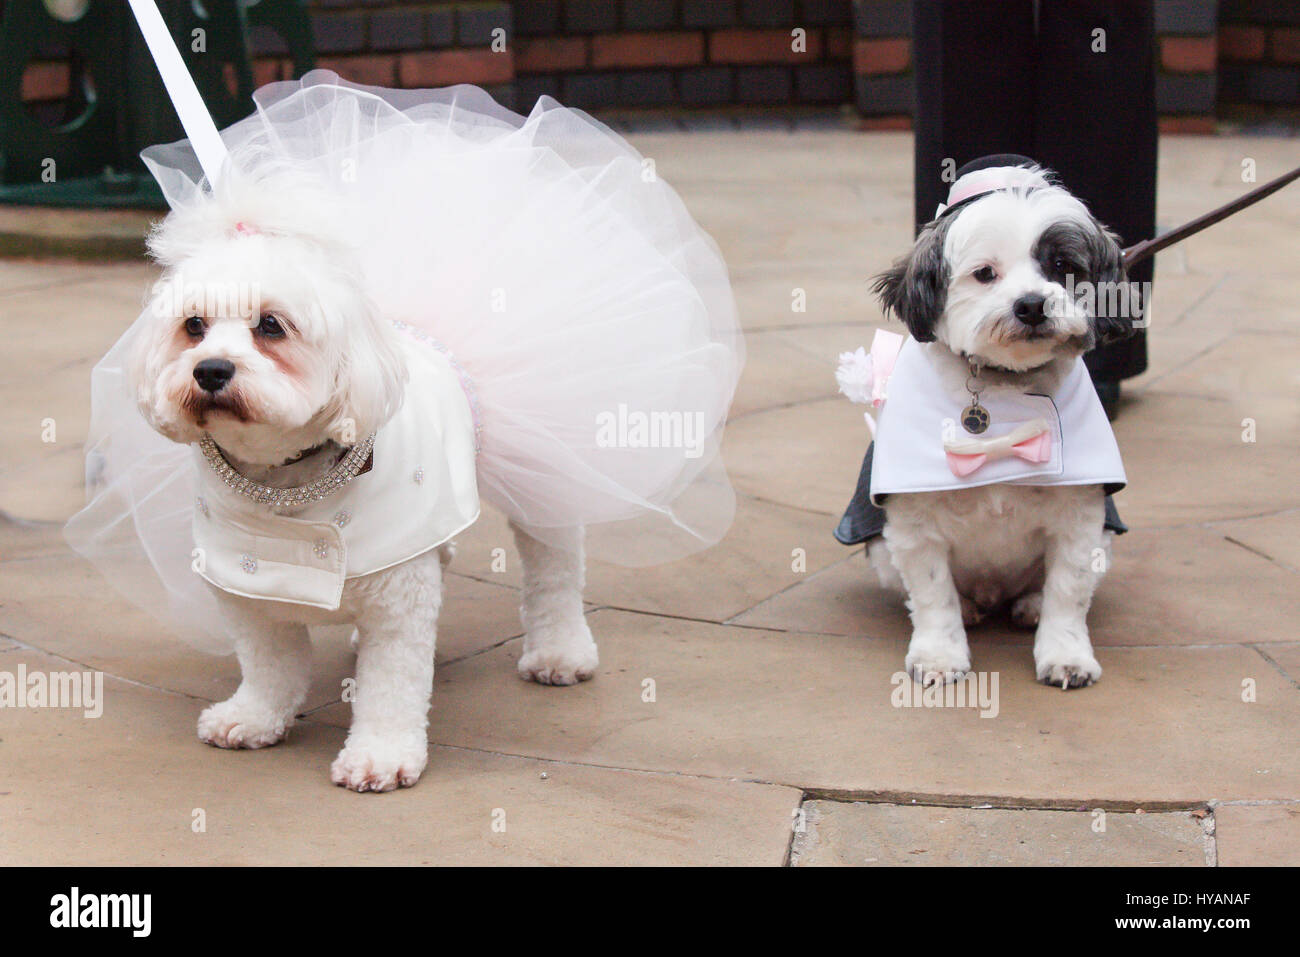 Brindley Place, Birmingham: Lady and Rufus stand together during the ceremony.  A DOGGY wedding could be the most whirlwind yet as former lonely-hearts Rufus and Lady get hitched after dating for just THREE-WEEKS. Pictures show how love-up Bichon Frise Lady (3) and Cavachon Rufus (2) were walked up the aisle by their owners and were married to the delight of 60 human and canine wedding guests. Despite the speed of their relationship the setting couldn’t be more romantic – with the UK’s only pet registrar Ann Clark (57) presiding over the pooch-wedding on a bandstand in Birmingham’s Brindley Pl Stock Photo